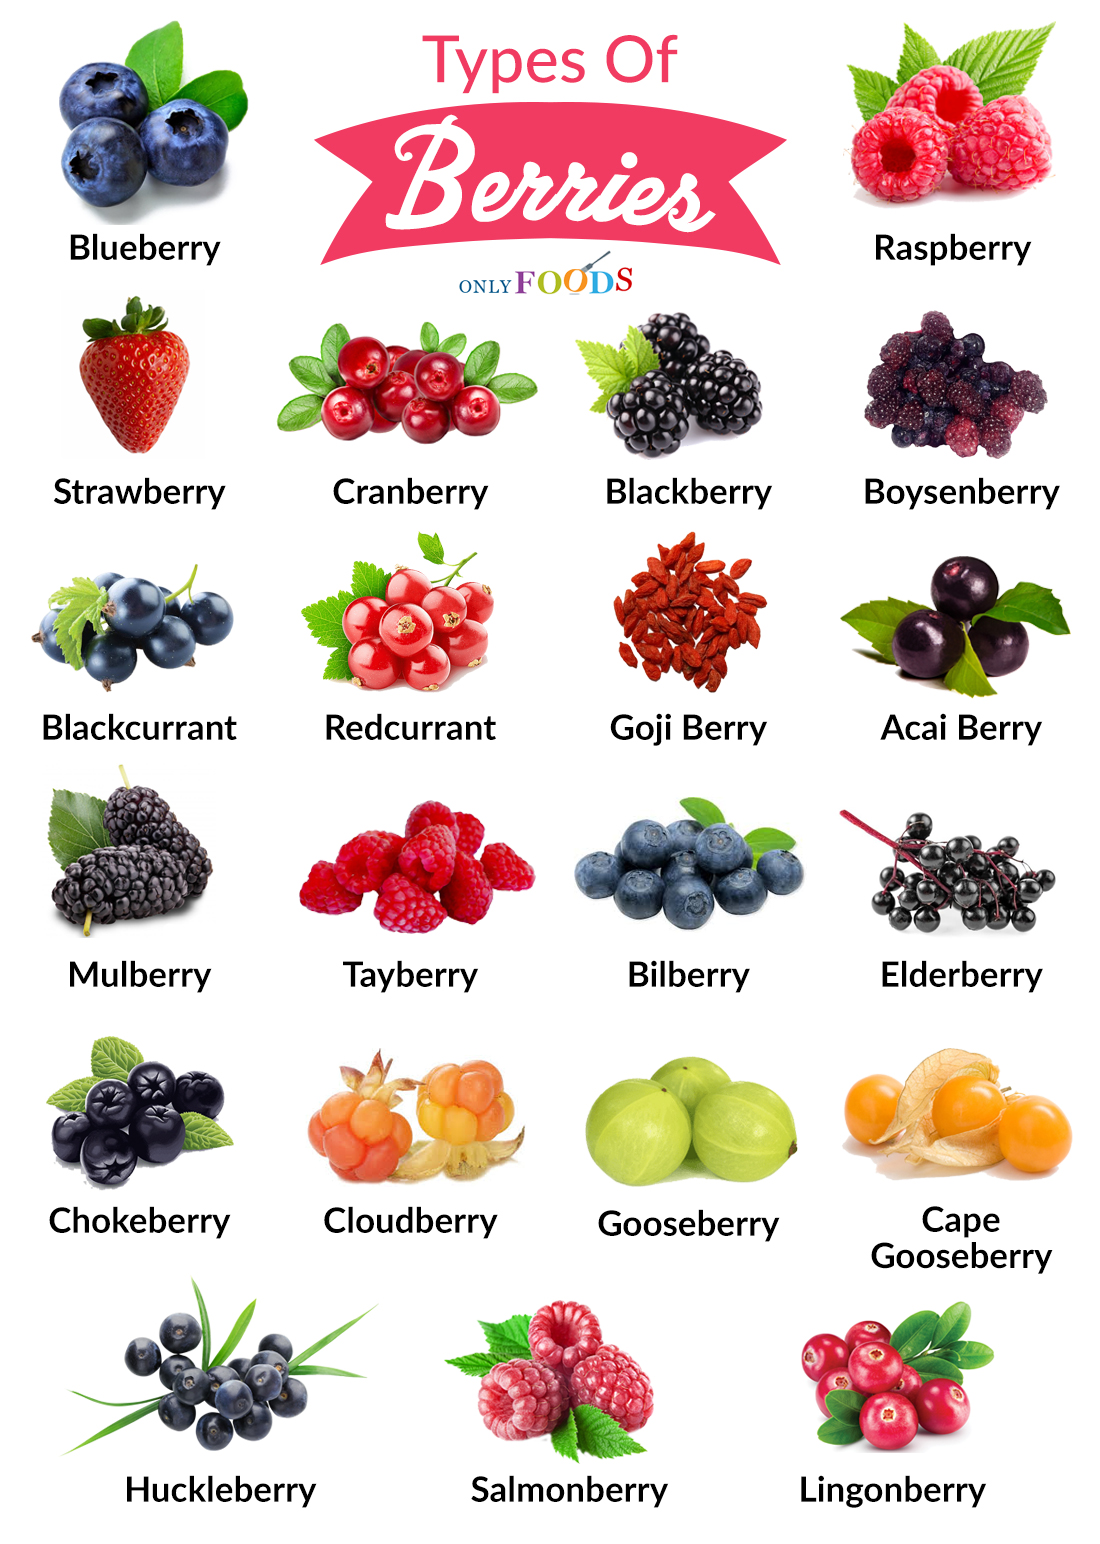 20 Types Of Berries And Ways To Use Them Shari's Berries Blog | vlr.eng.br